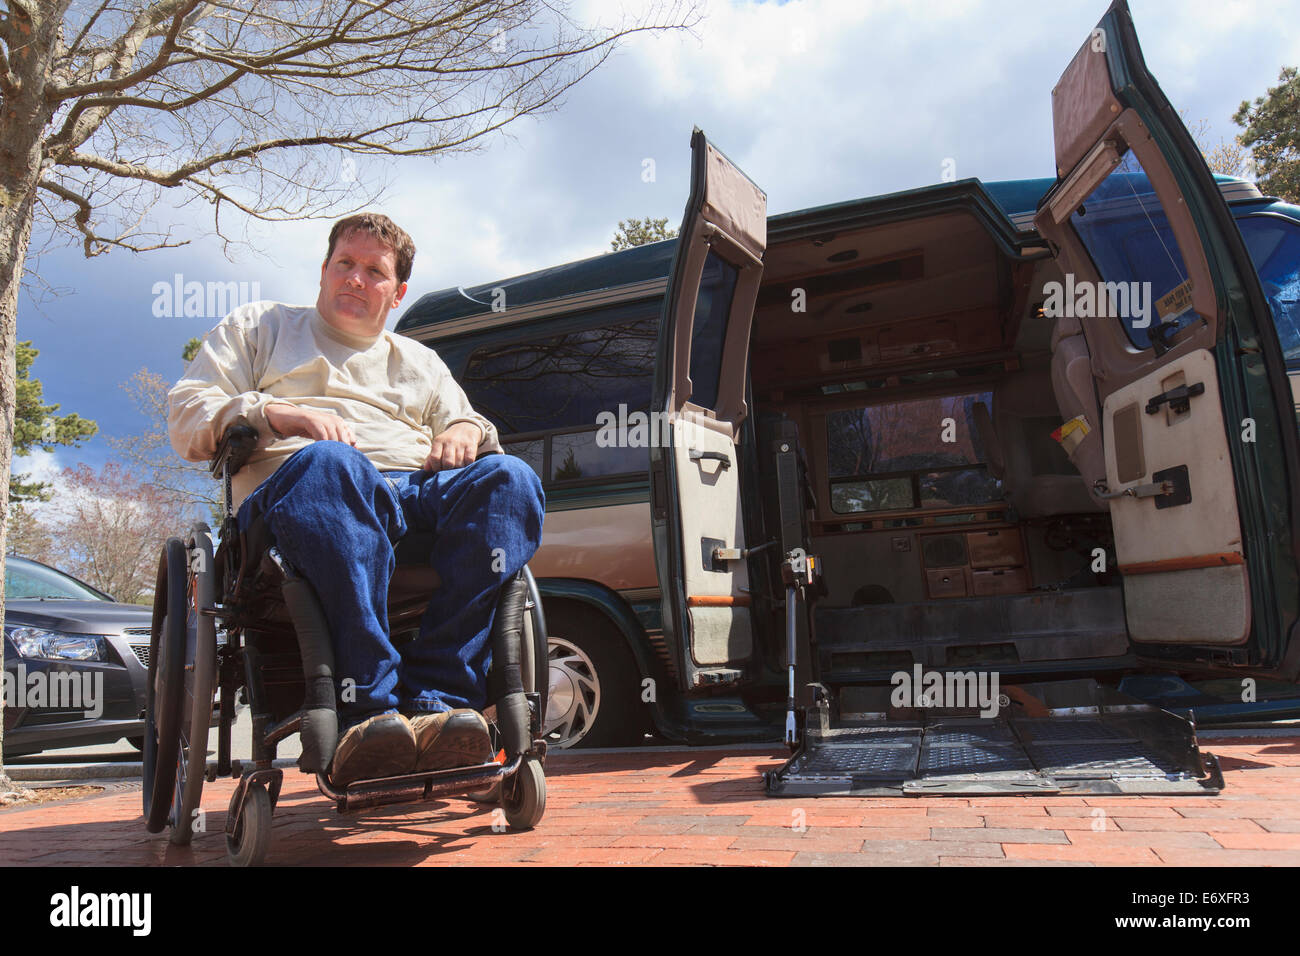 Man with Spinal Cord Injury opening his accessible van remotely Stock Photo